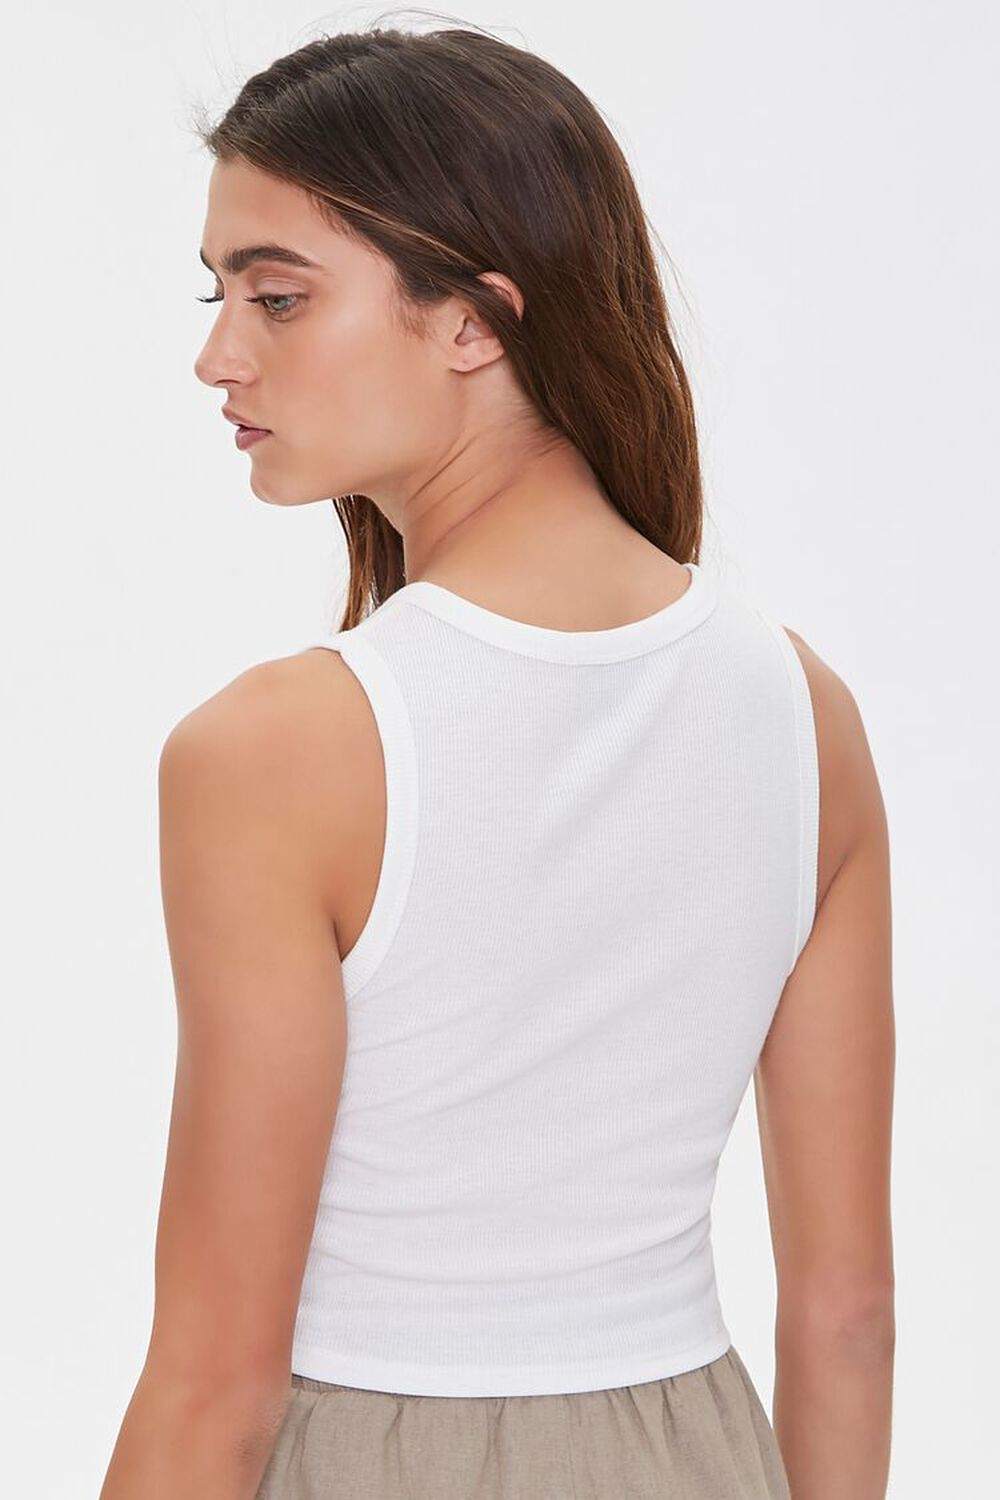 WHITE Ribbed Knit Crop Top, image 3